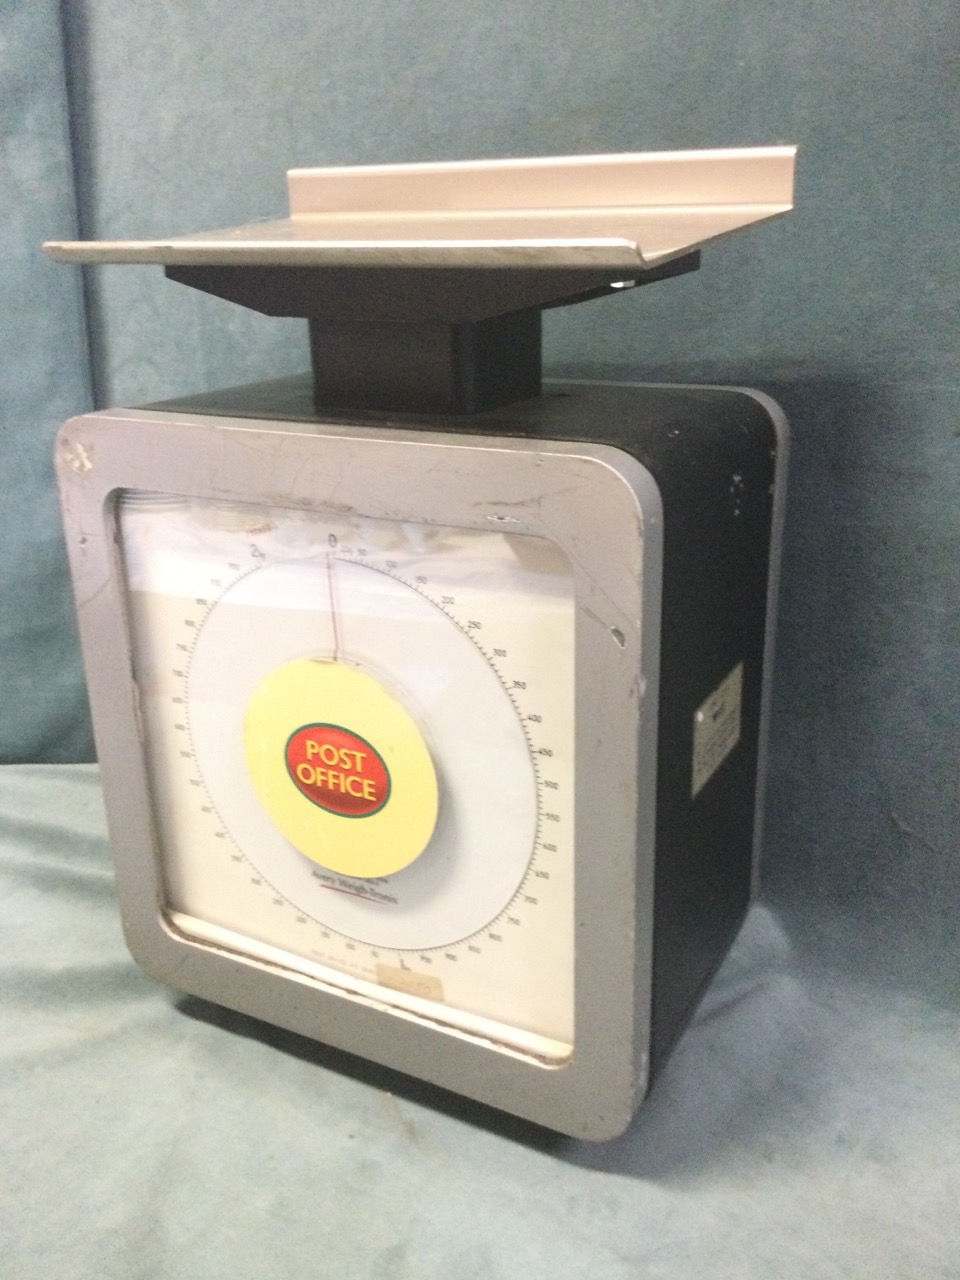 A set of 2006 Post Office scales by Avery Weigh-Tronix, with rounded square two-sided dial to - Image 3 of 3